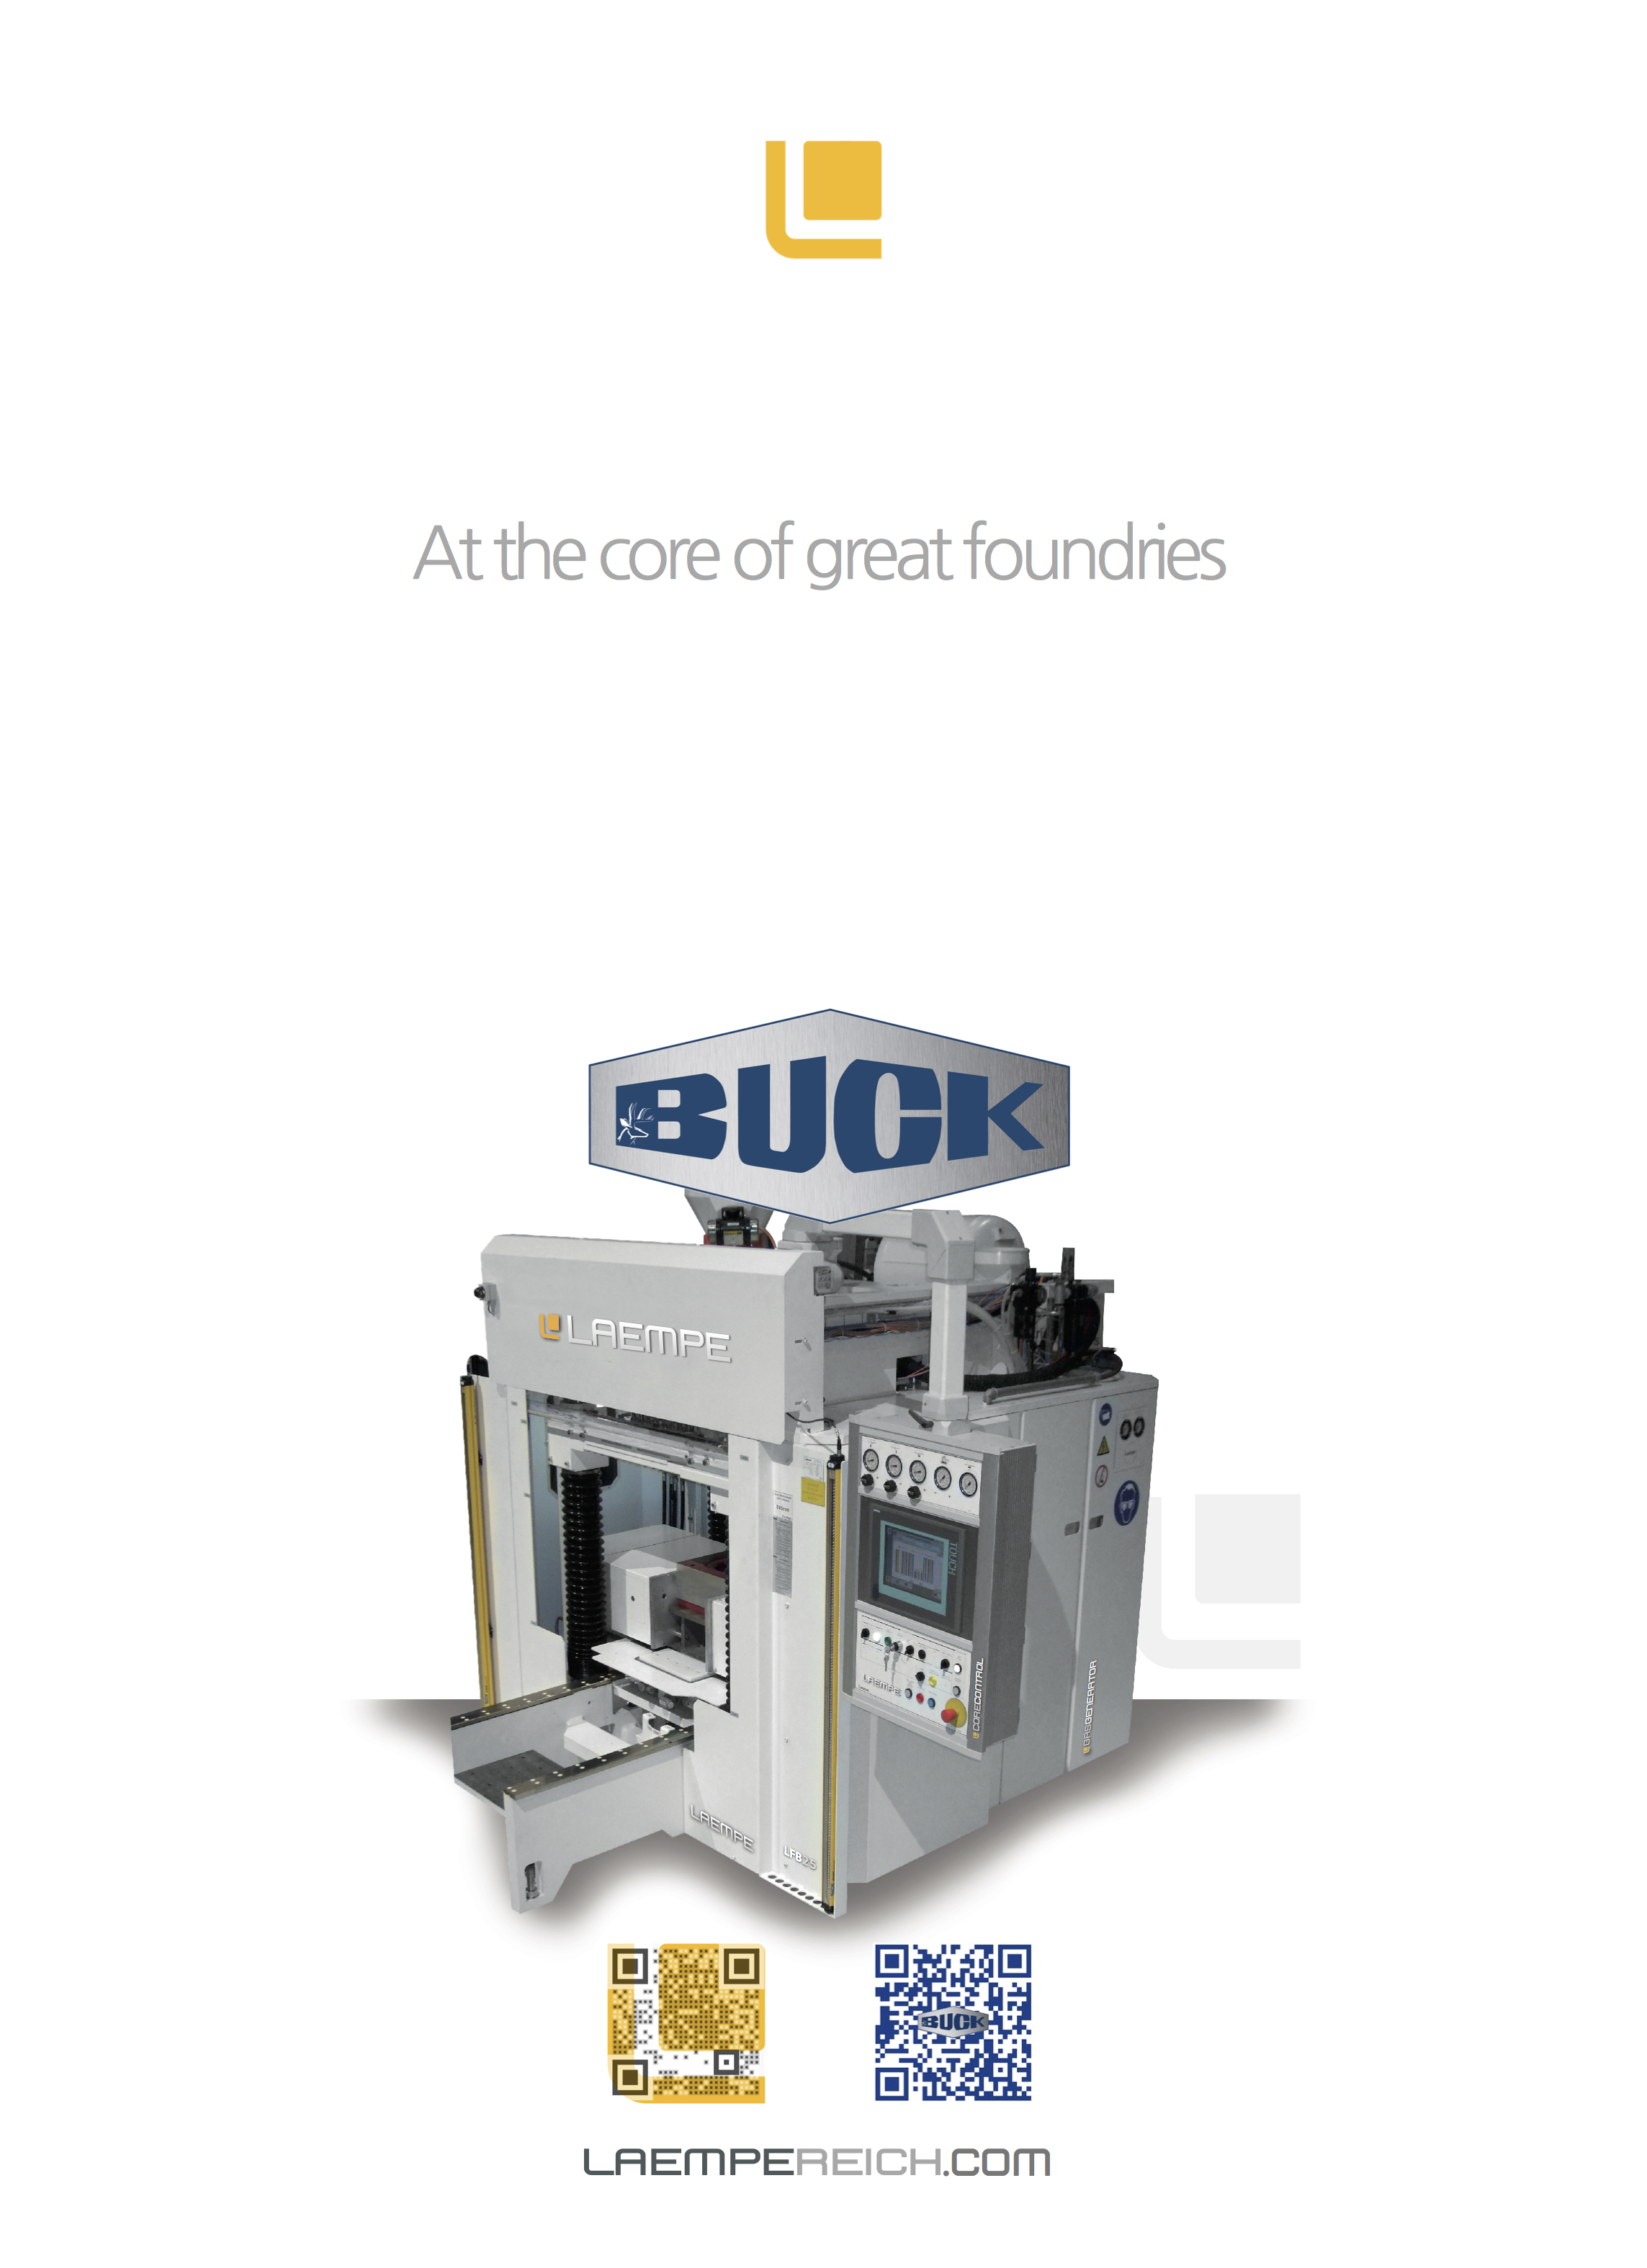 Buck - At the Core of Great Foundries.jpg